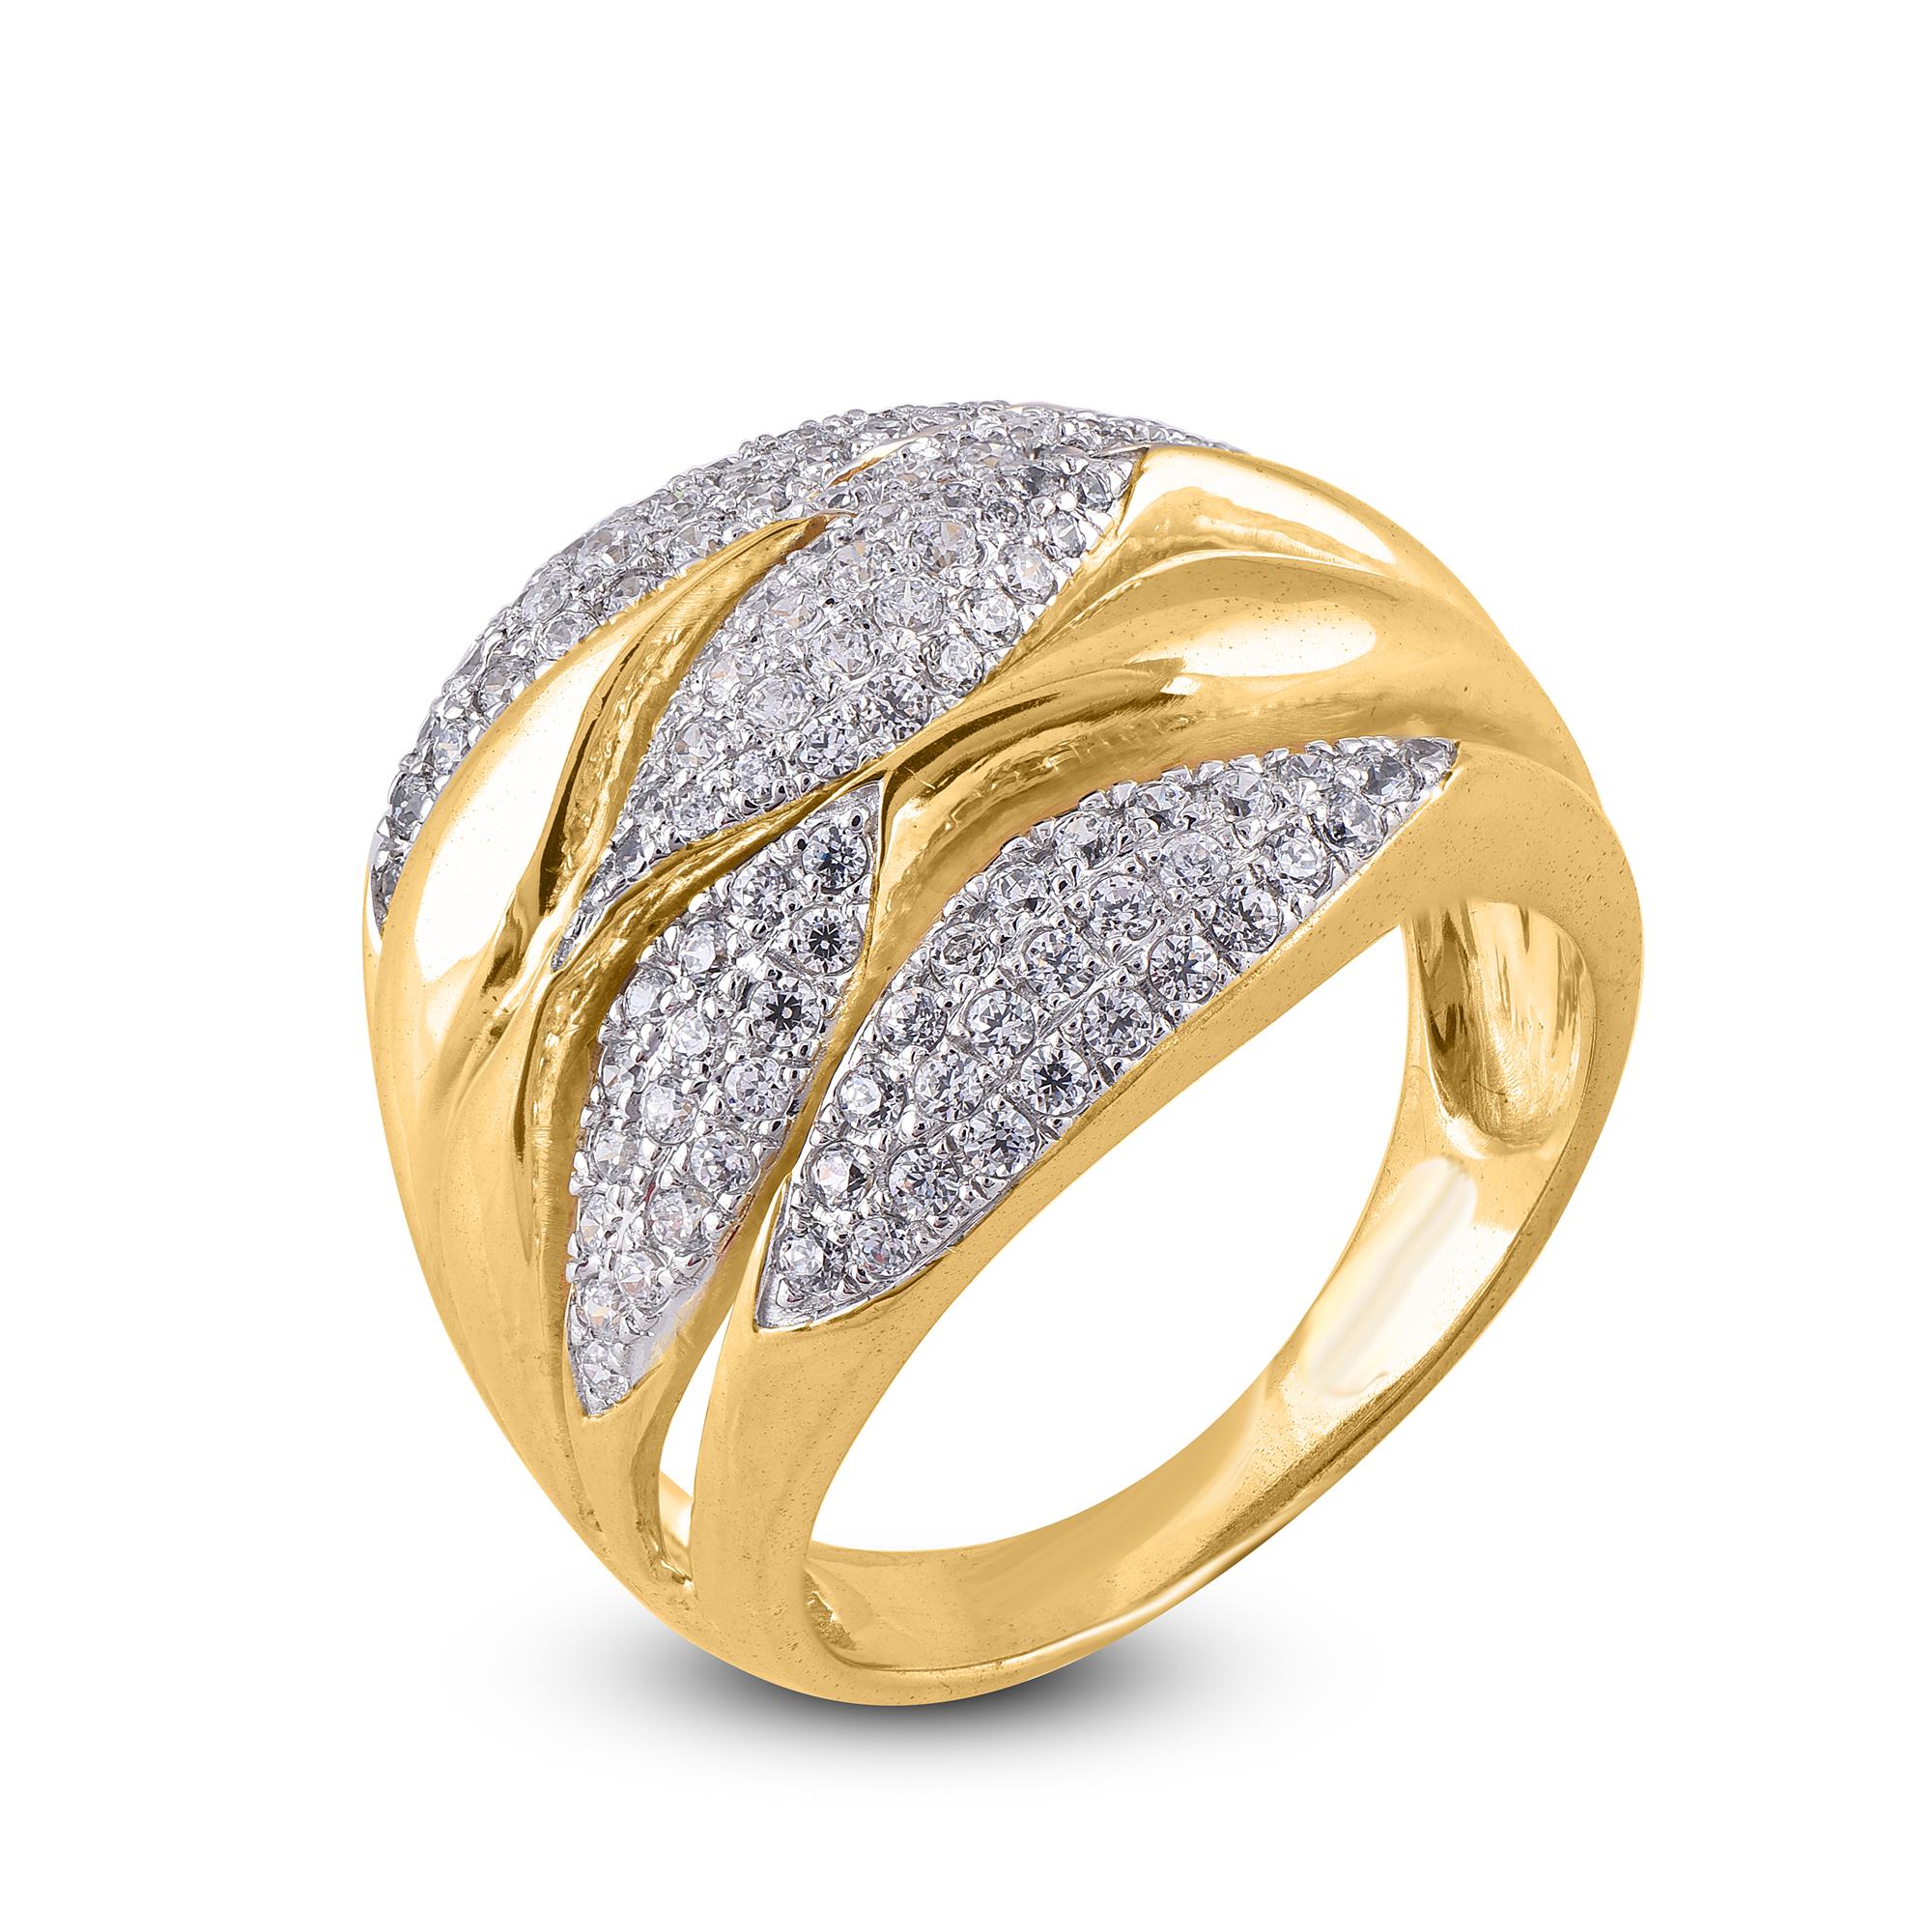 Designed with romance in mind, this diamond wide wedding band increases the sparkle factor. The ring is crafted from 14 karat gold in your choice of white, rose, or yellow, and features Round 116 diamonds, Pave set, H-I color I2 clarity and a high